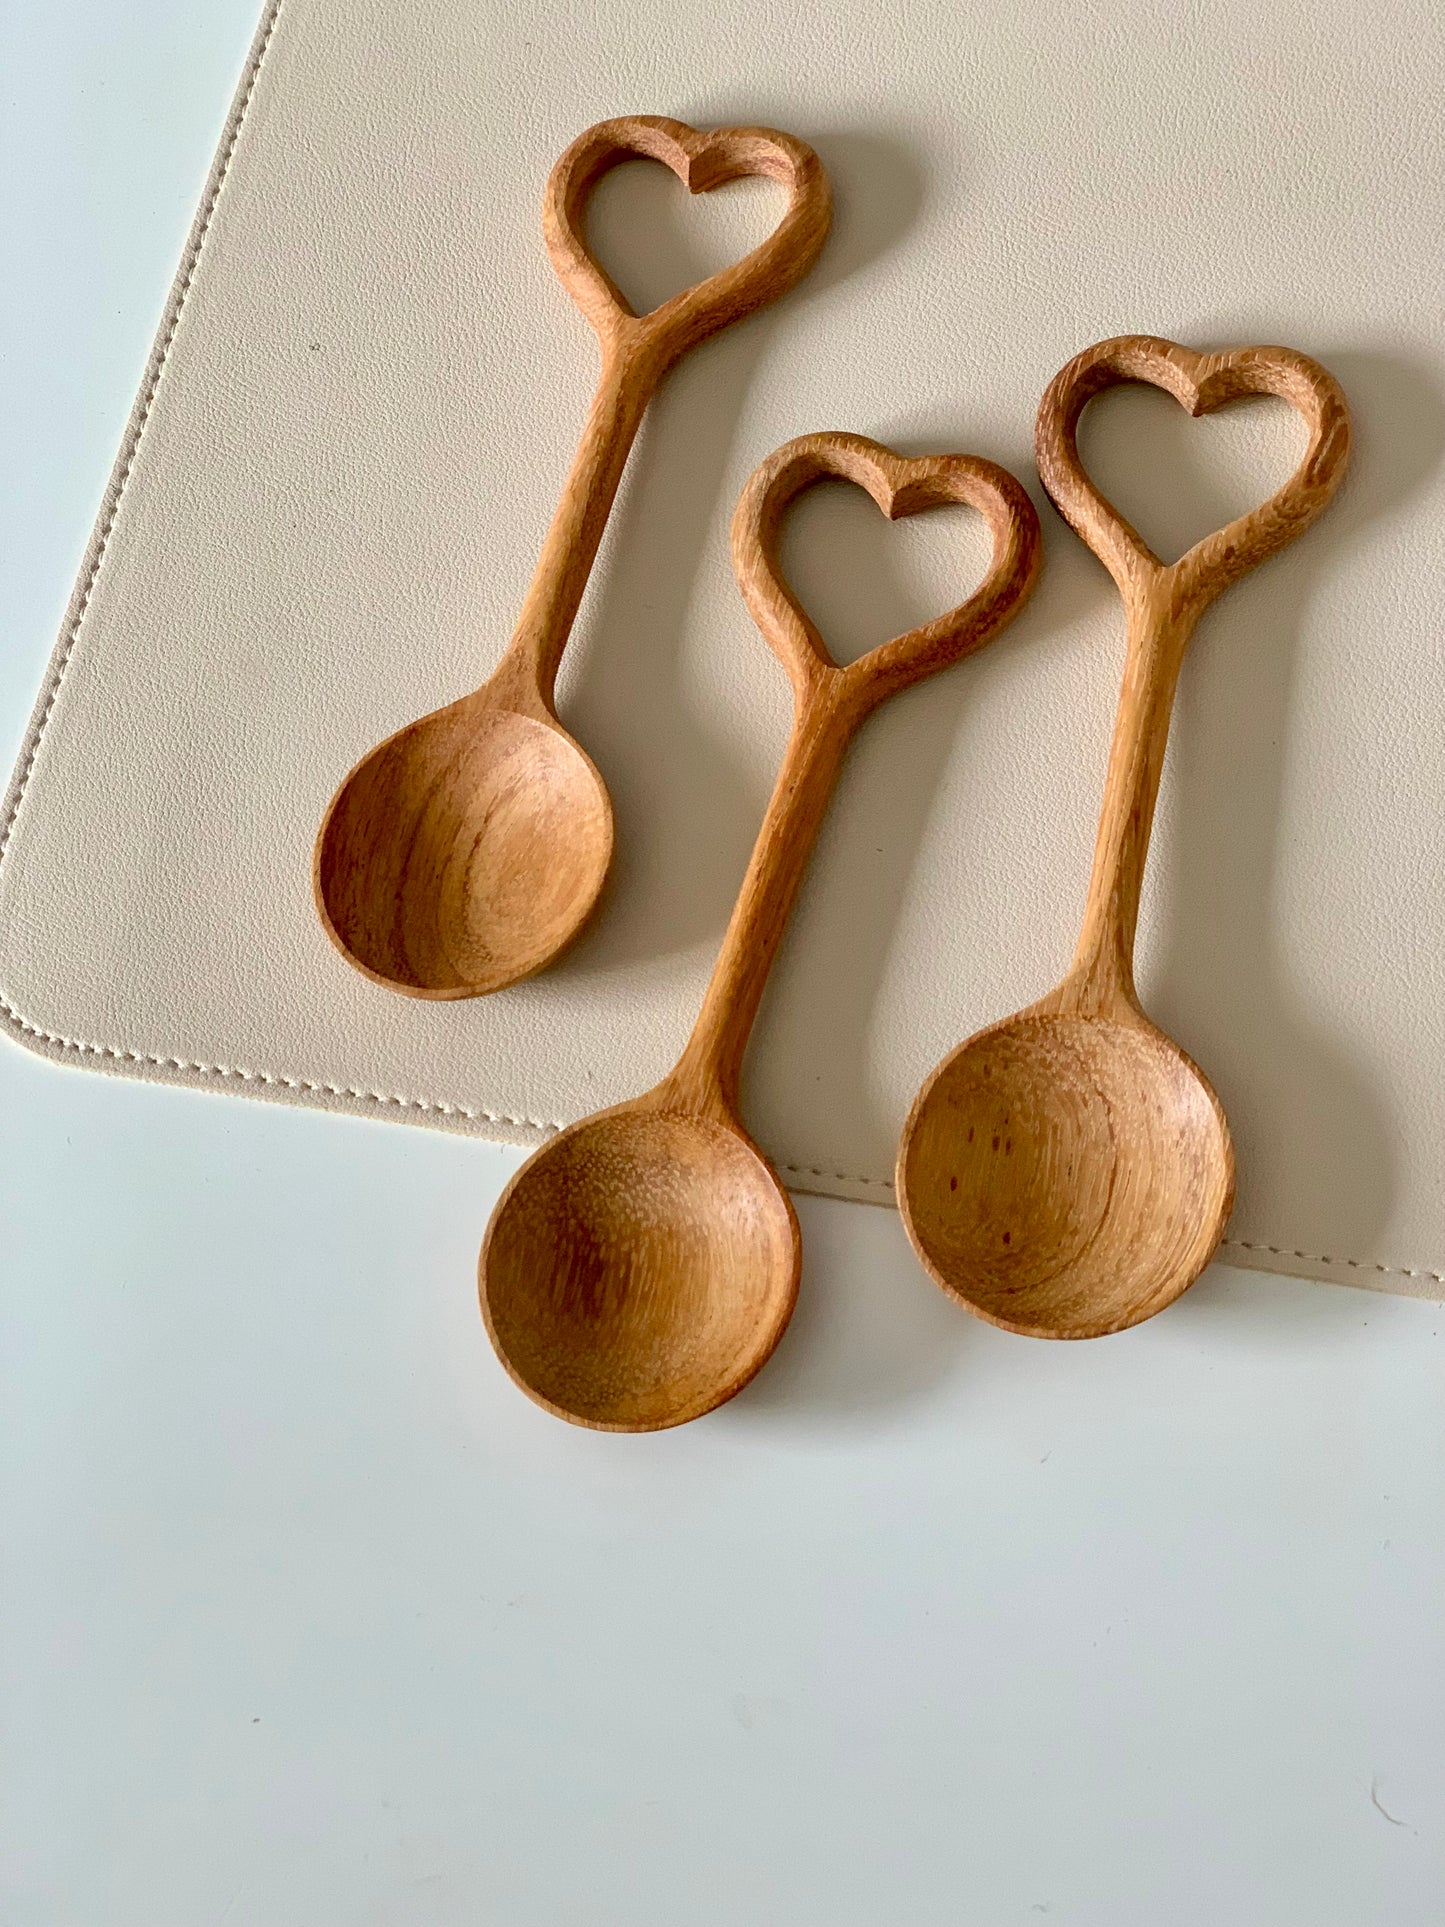 One Spoon with Heart Handle